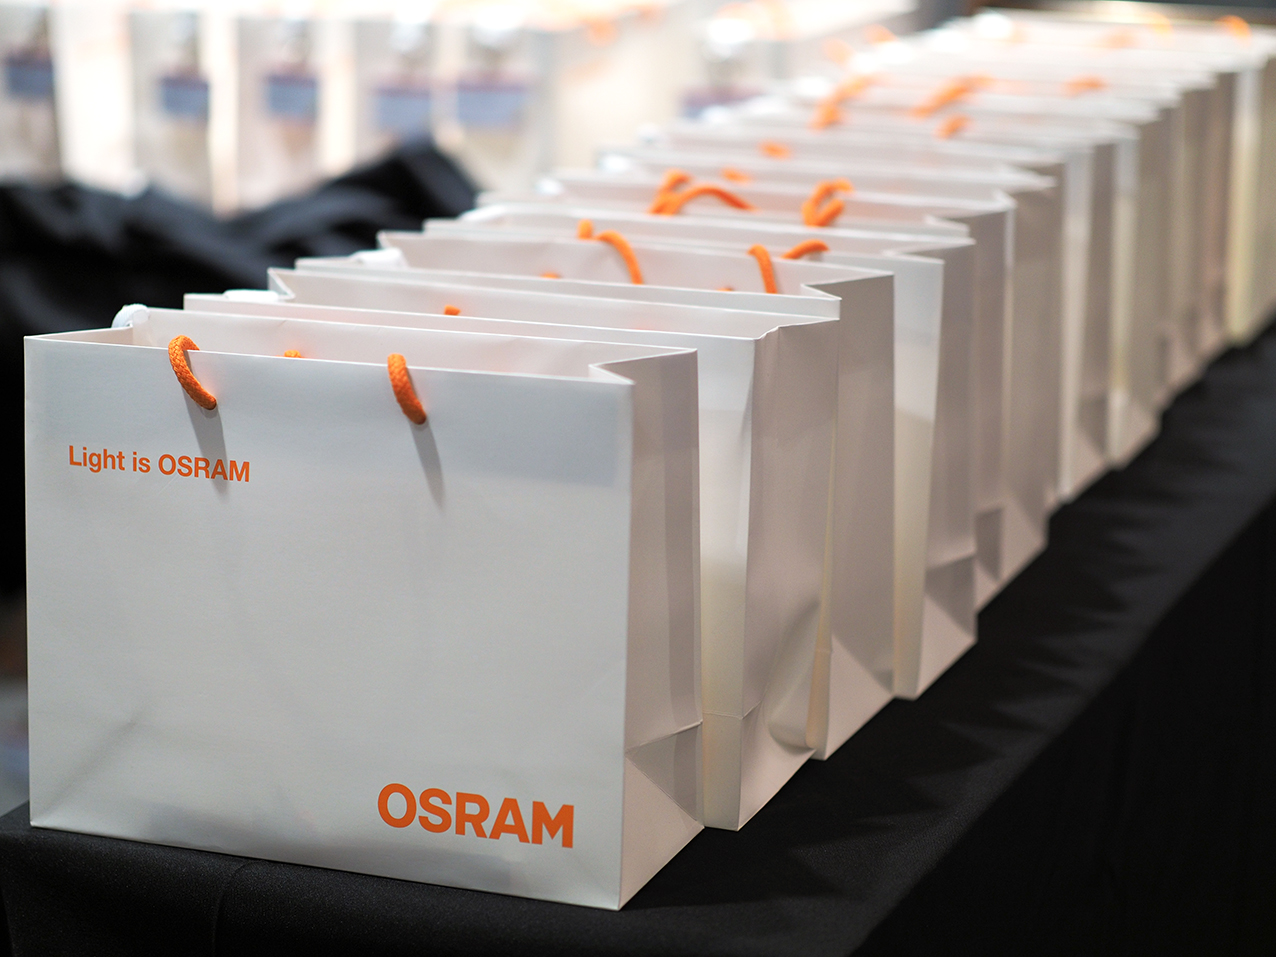 Goodie bag OSRAM Management Conference organised by Prio Event Management